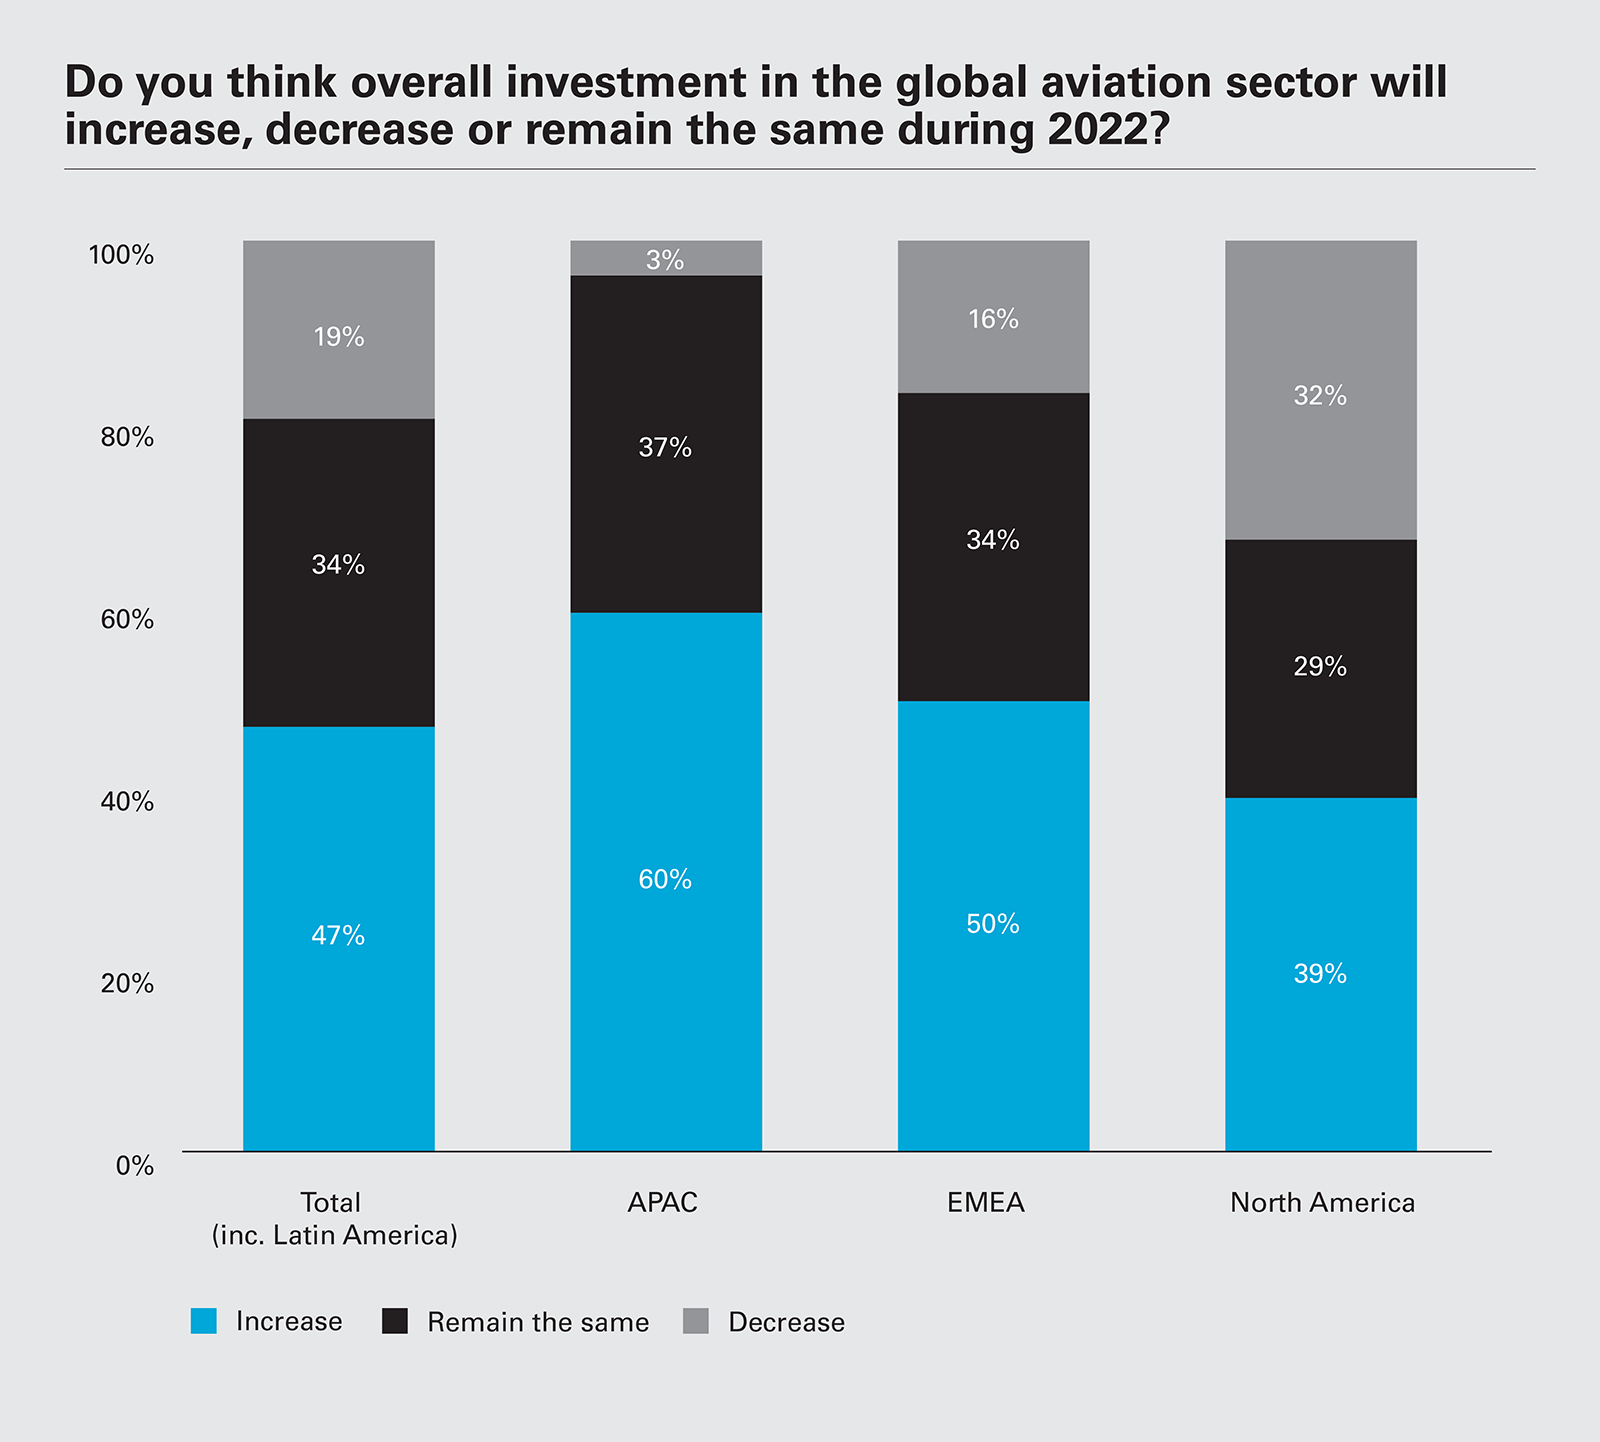 Do you think overall investment in the global aviation sector will increase, decrease or remain the same during 2022?